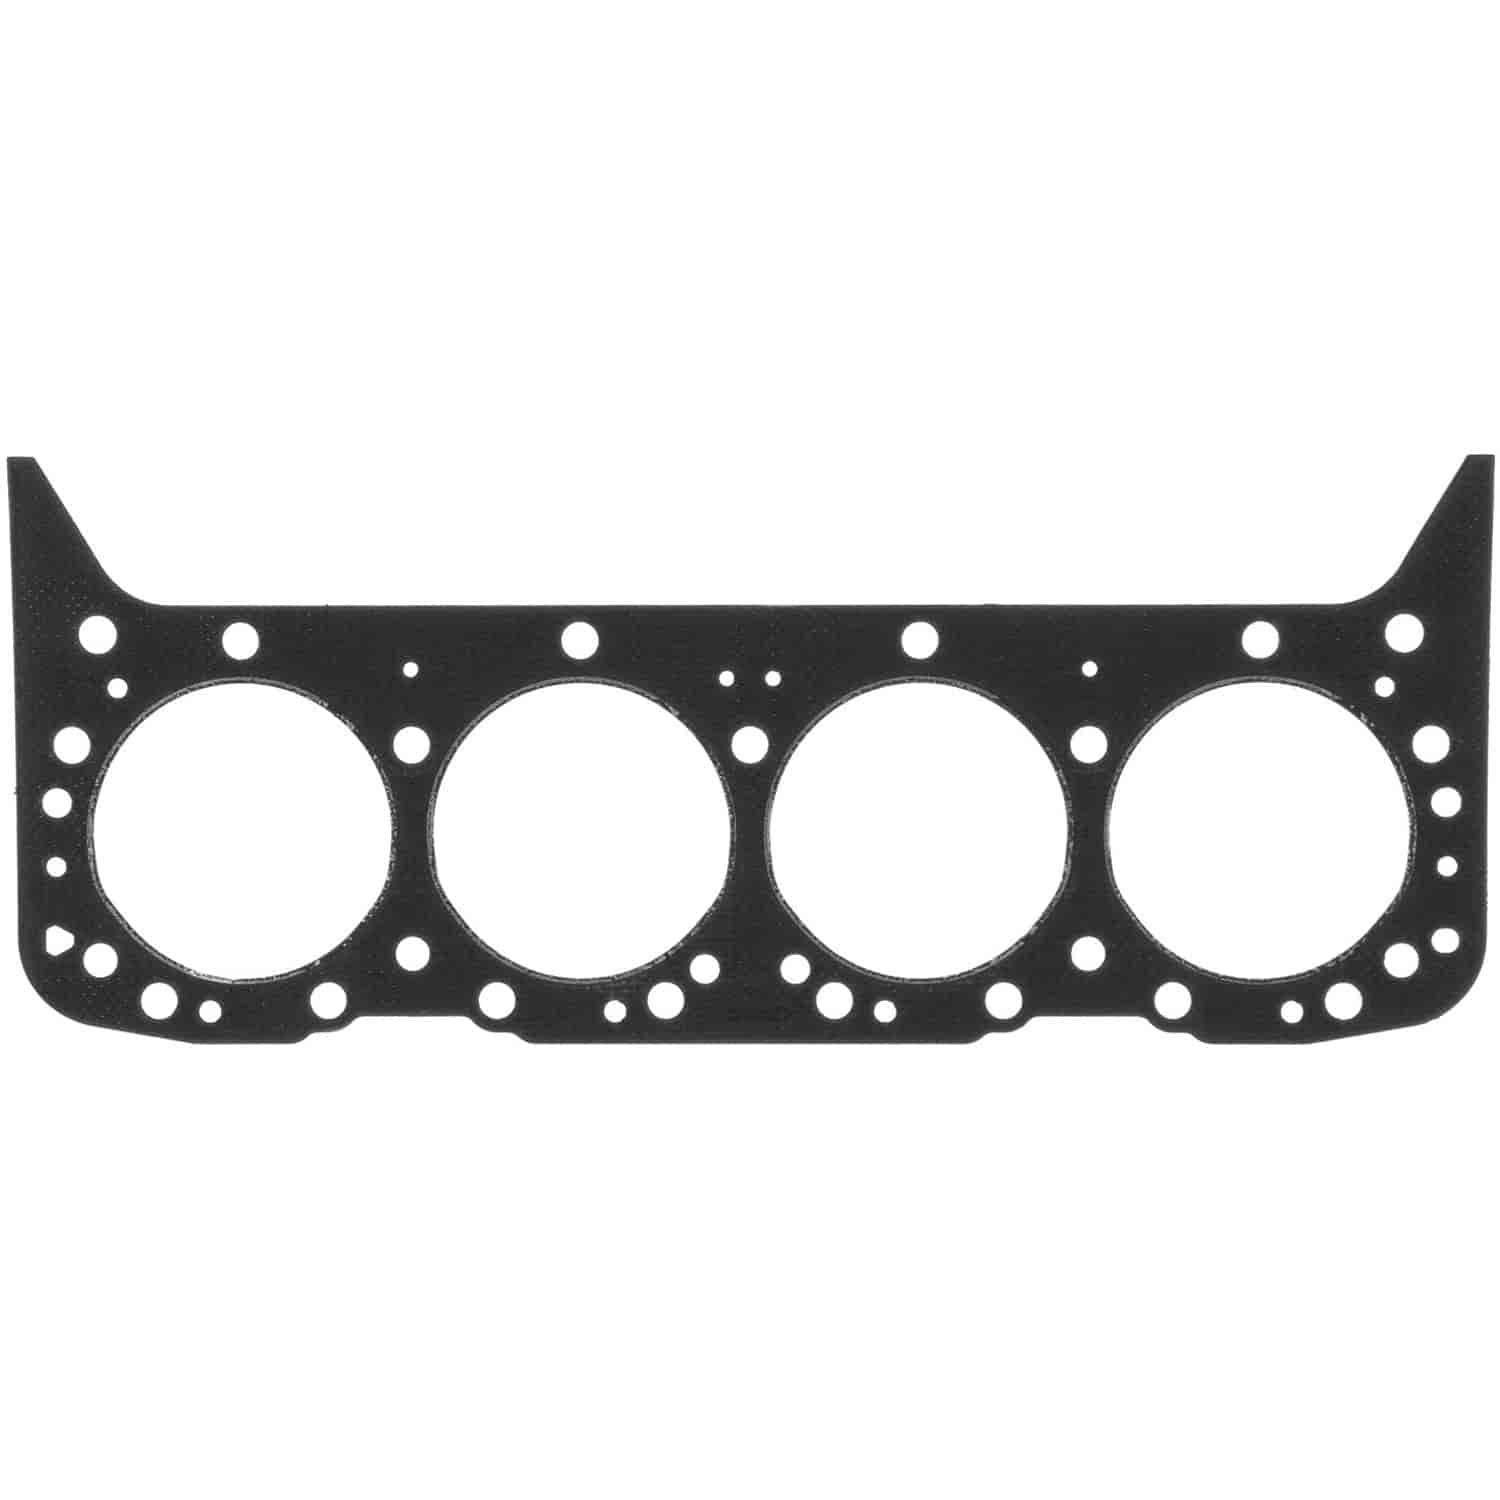 Cylinder Head Gasket 1975-2002 Small Block Chevy 262/267/305